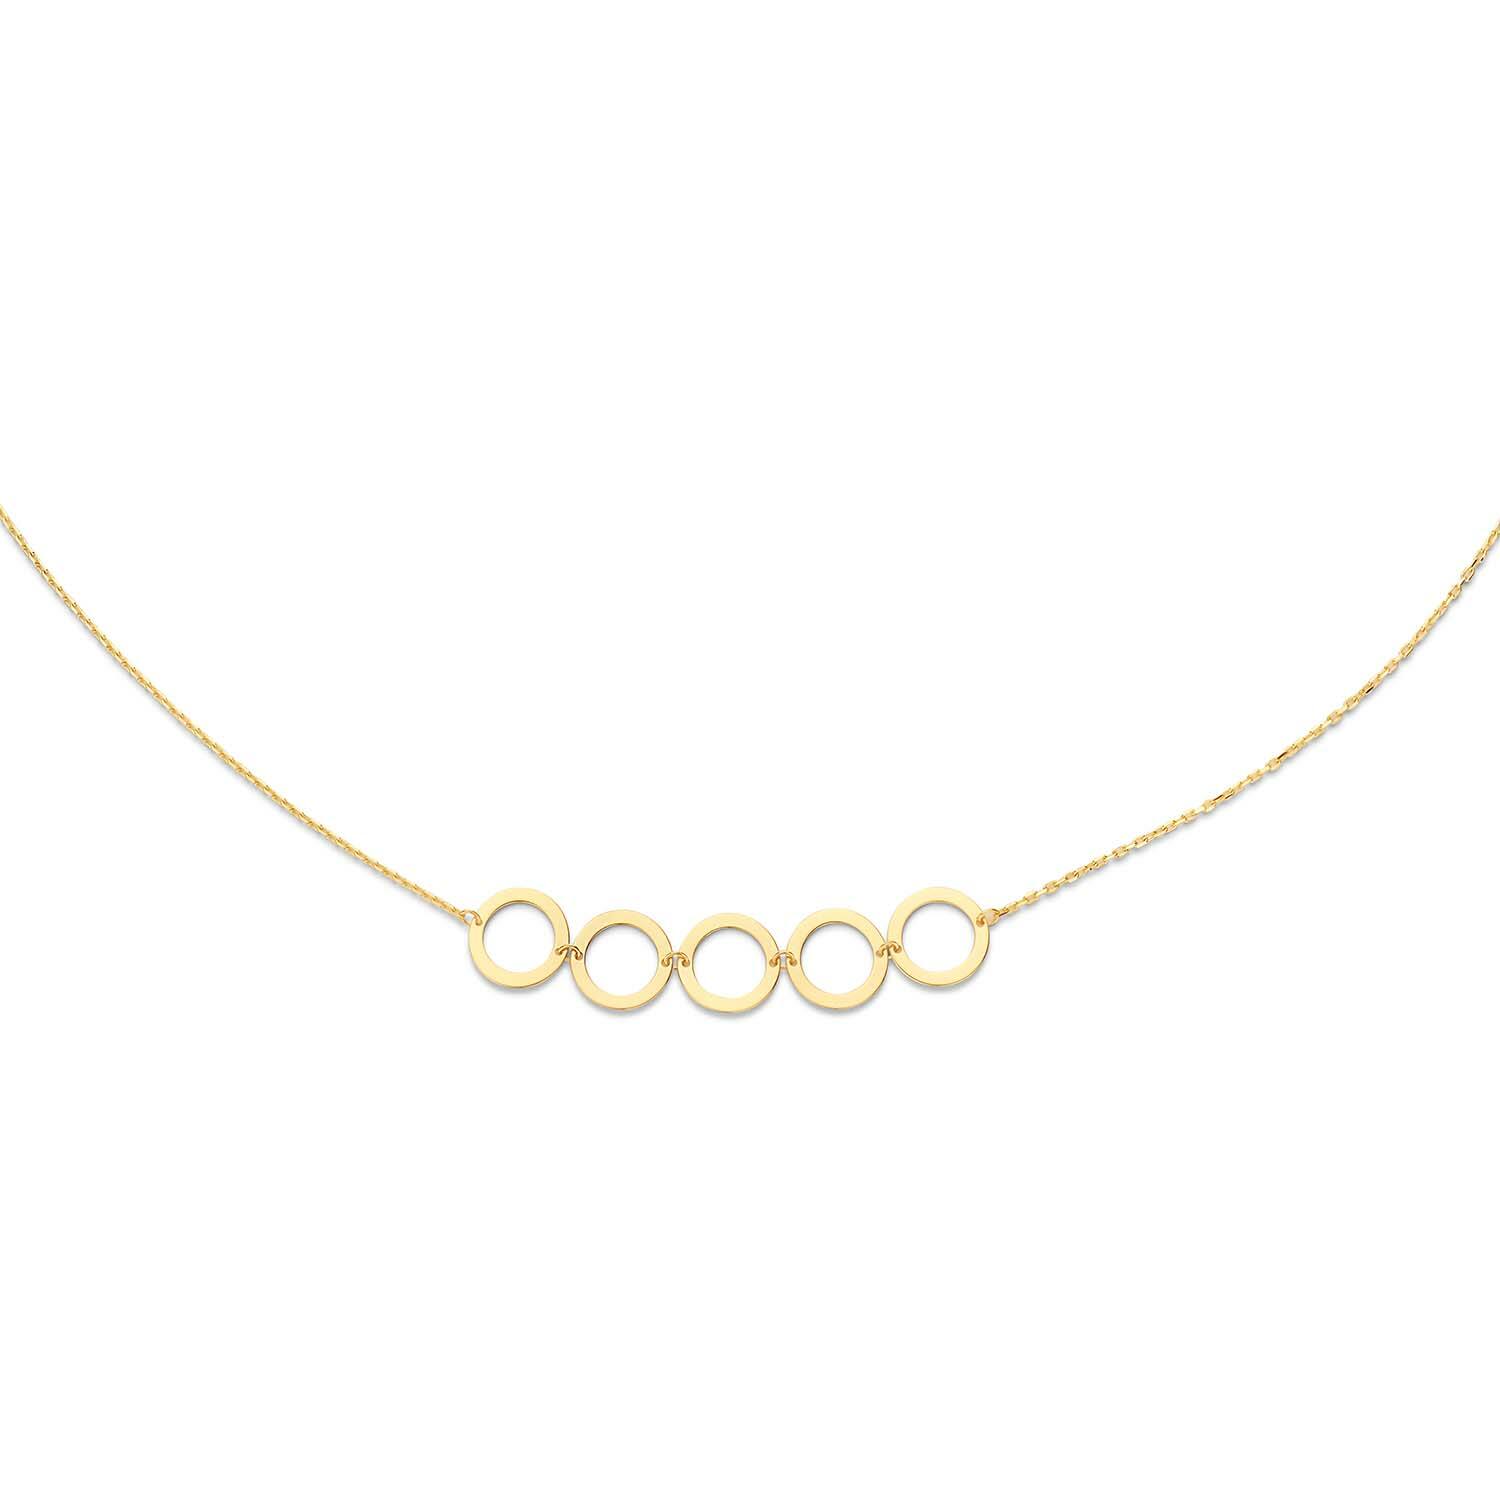 Inner Circle Necklace - 40x8mm - 40/42.5/ 45cm - 585